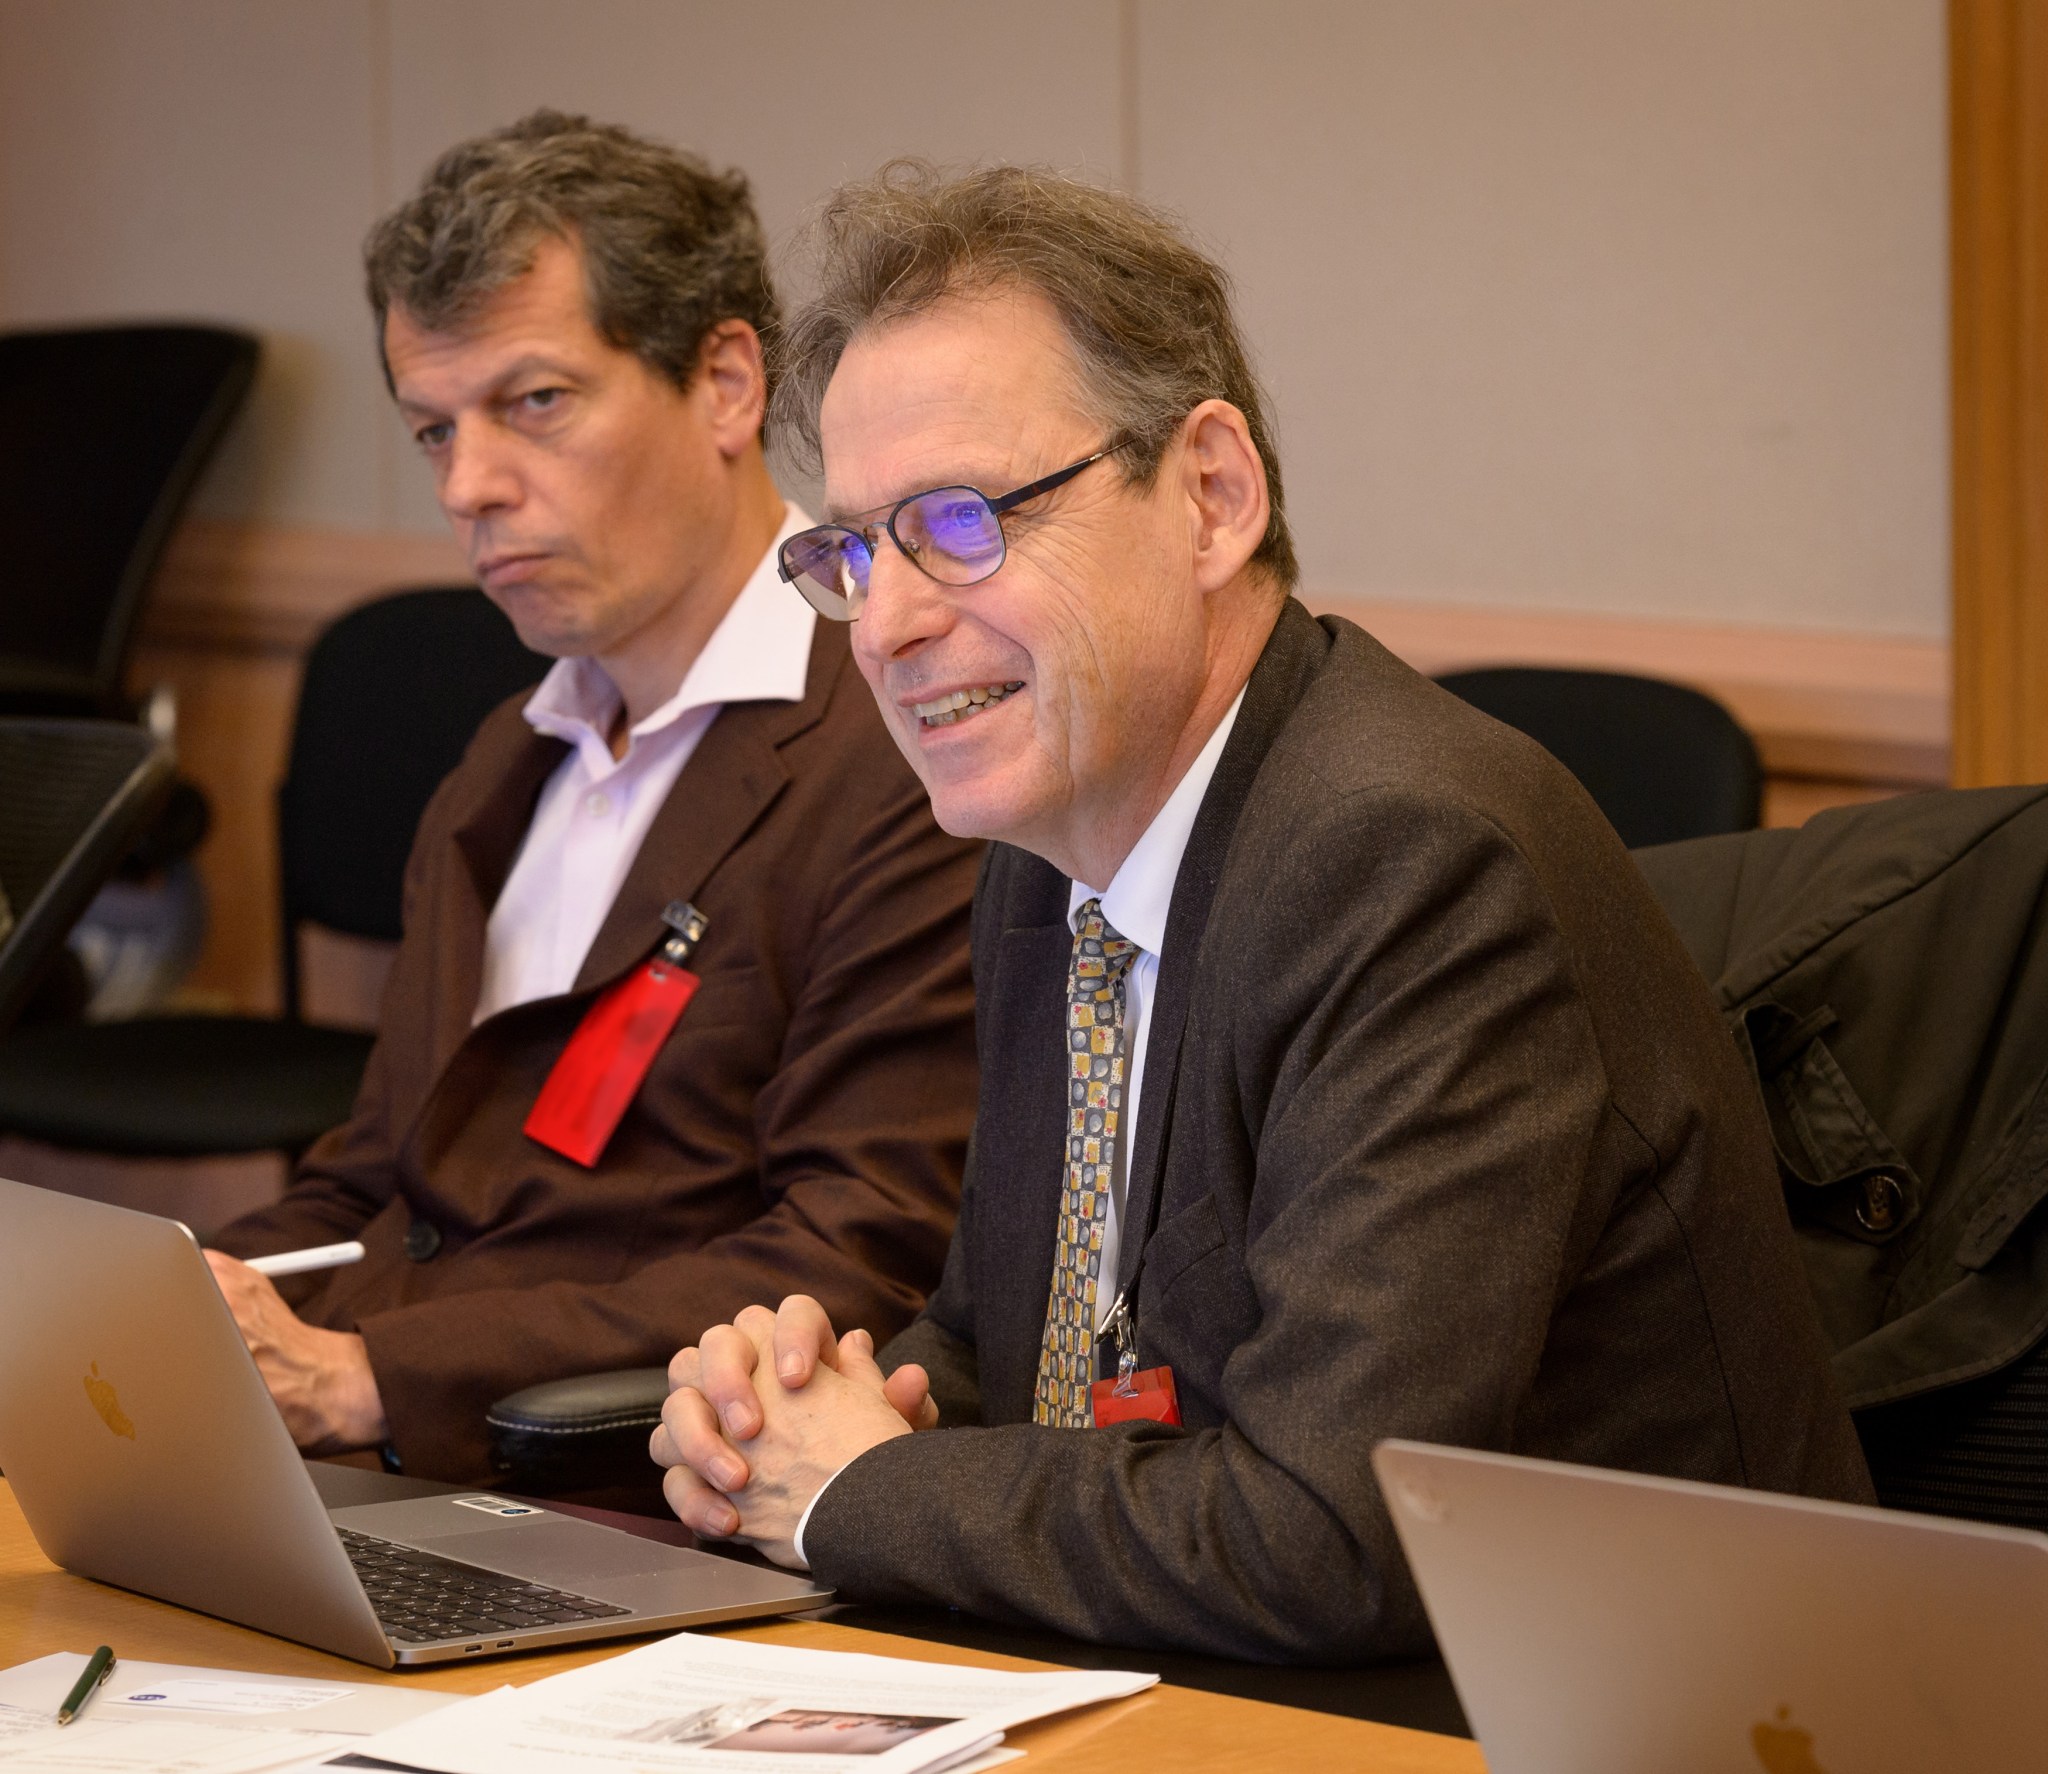 A man with black glasses wearing a suit leans forward against a table over his laptop, with another man in the background.